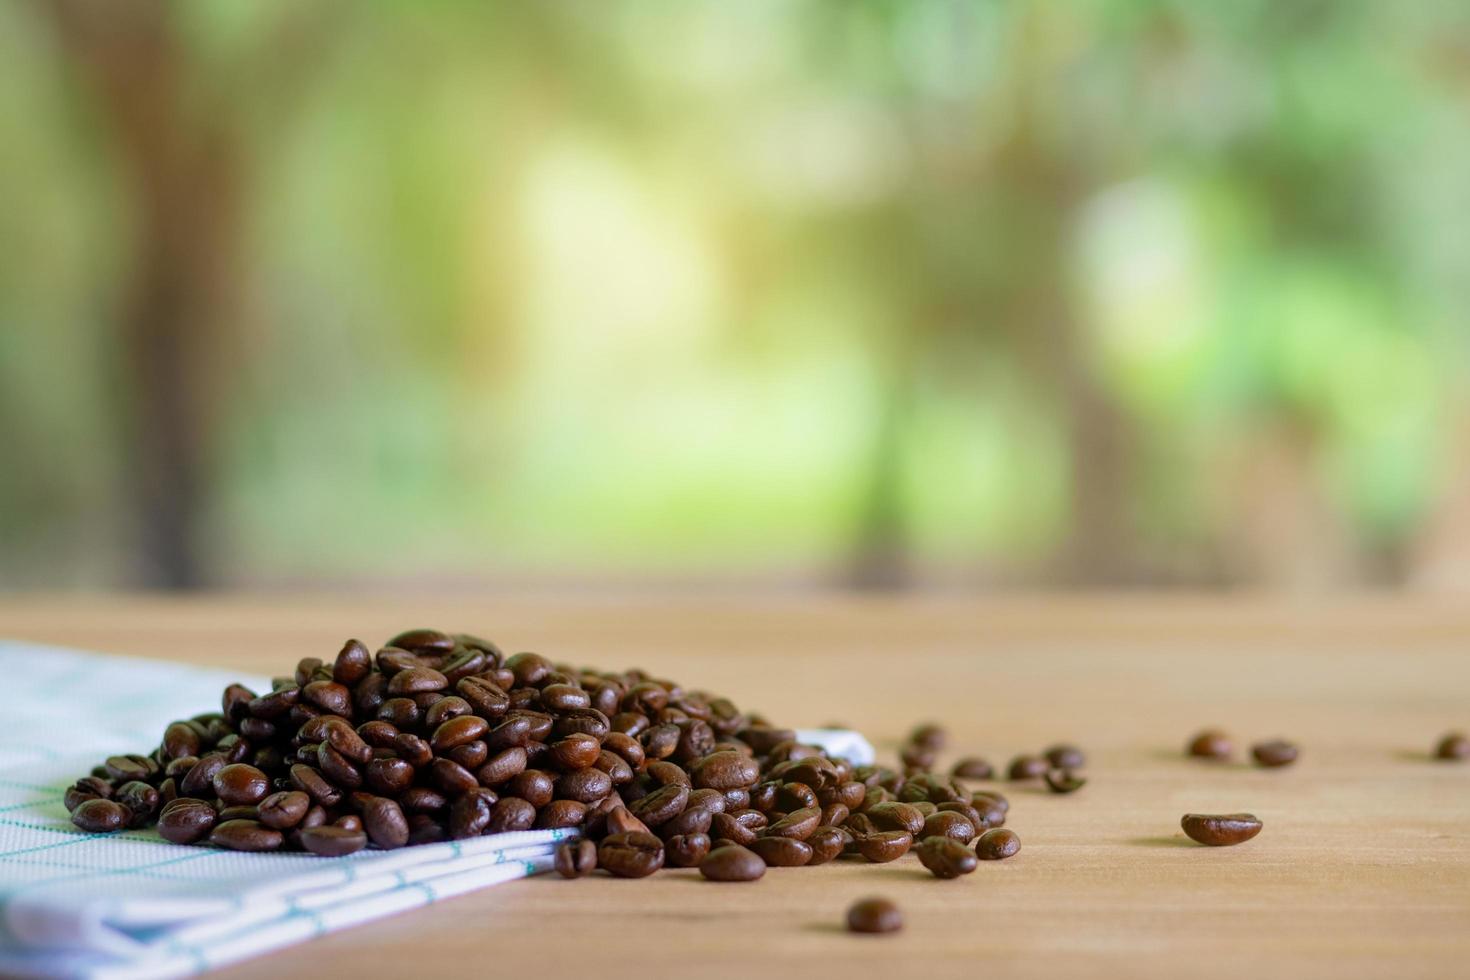 Roasted coffee beans on wooden background photo